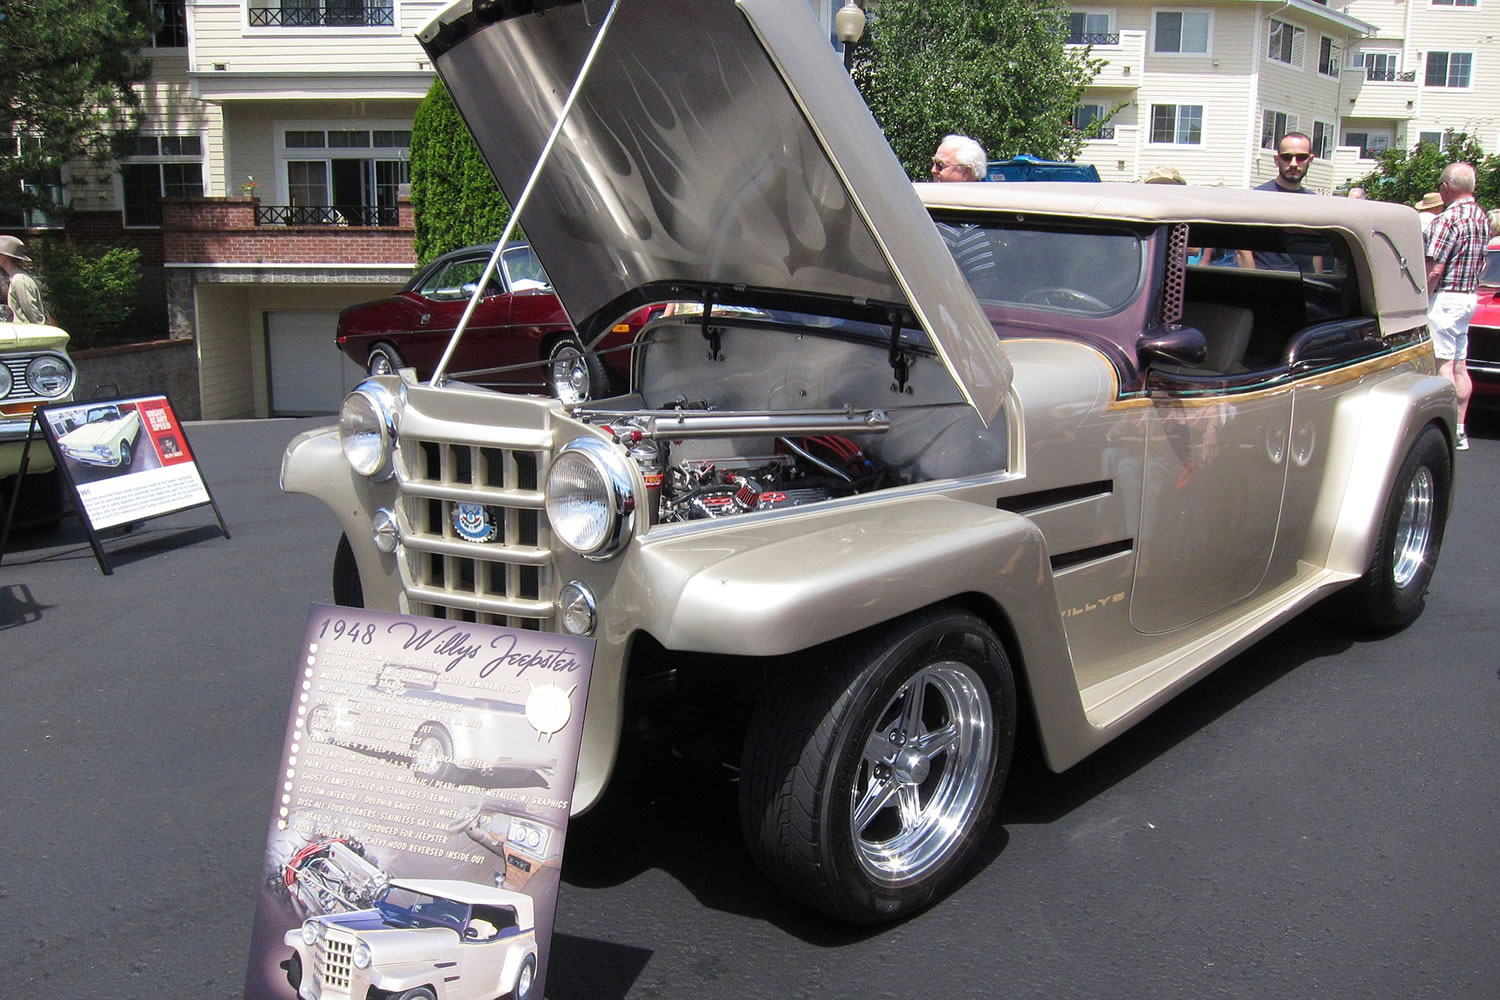 Cascade Park East: Bary Garrigues's 1948 Willy's Jeepster custom street rod earned the People's Choice Award at the eighth annual Touchmark Car Show